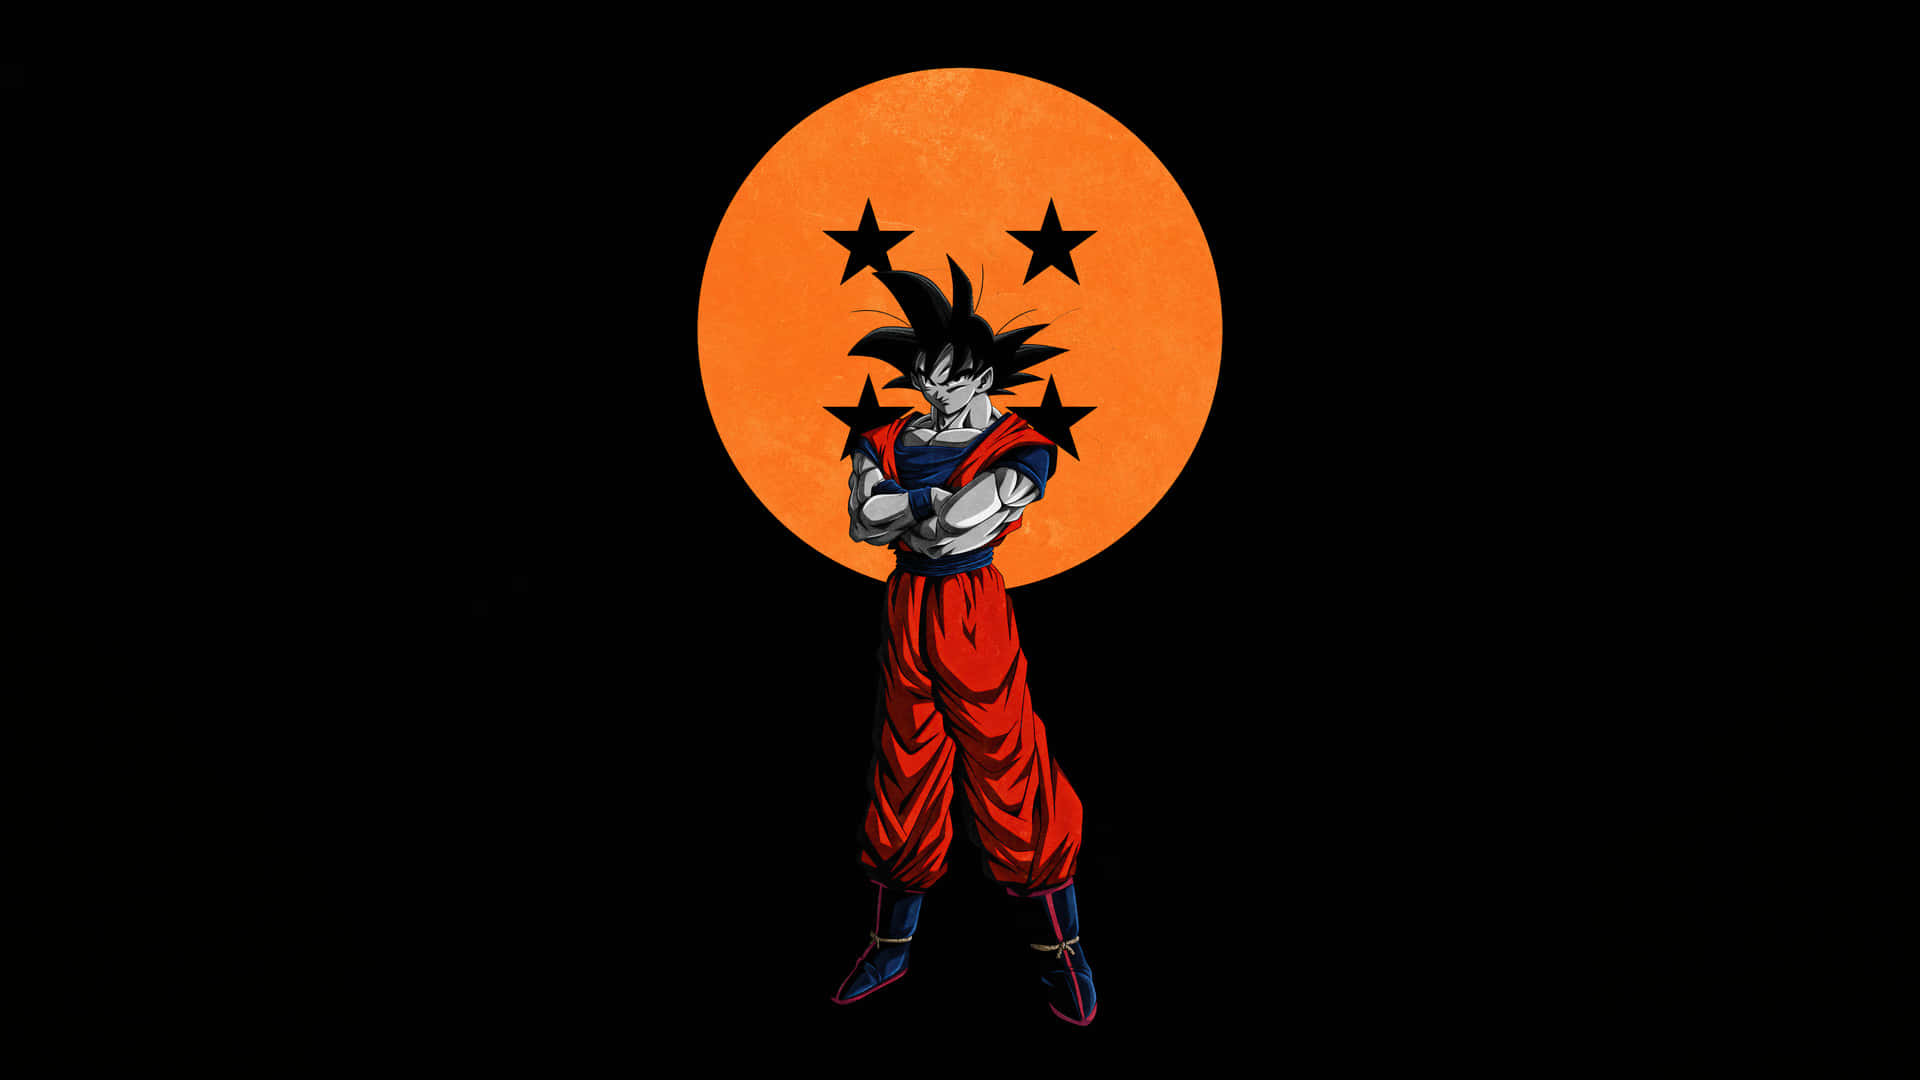 Goku is powered up and ready for the fight. Wallpaper